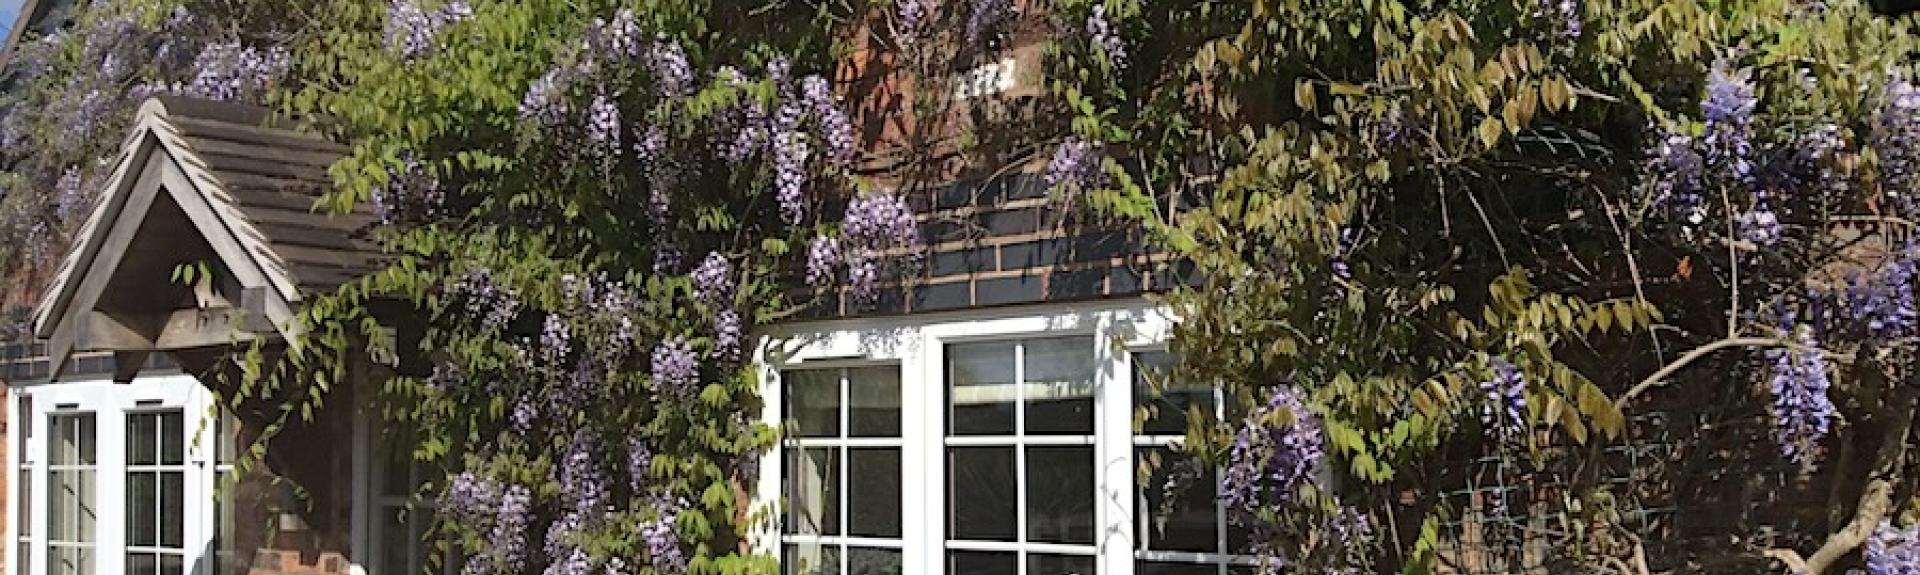 Exterior of a wisteria-clad, stone holiday cottage in Knutsford